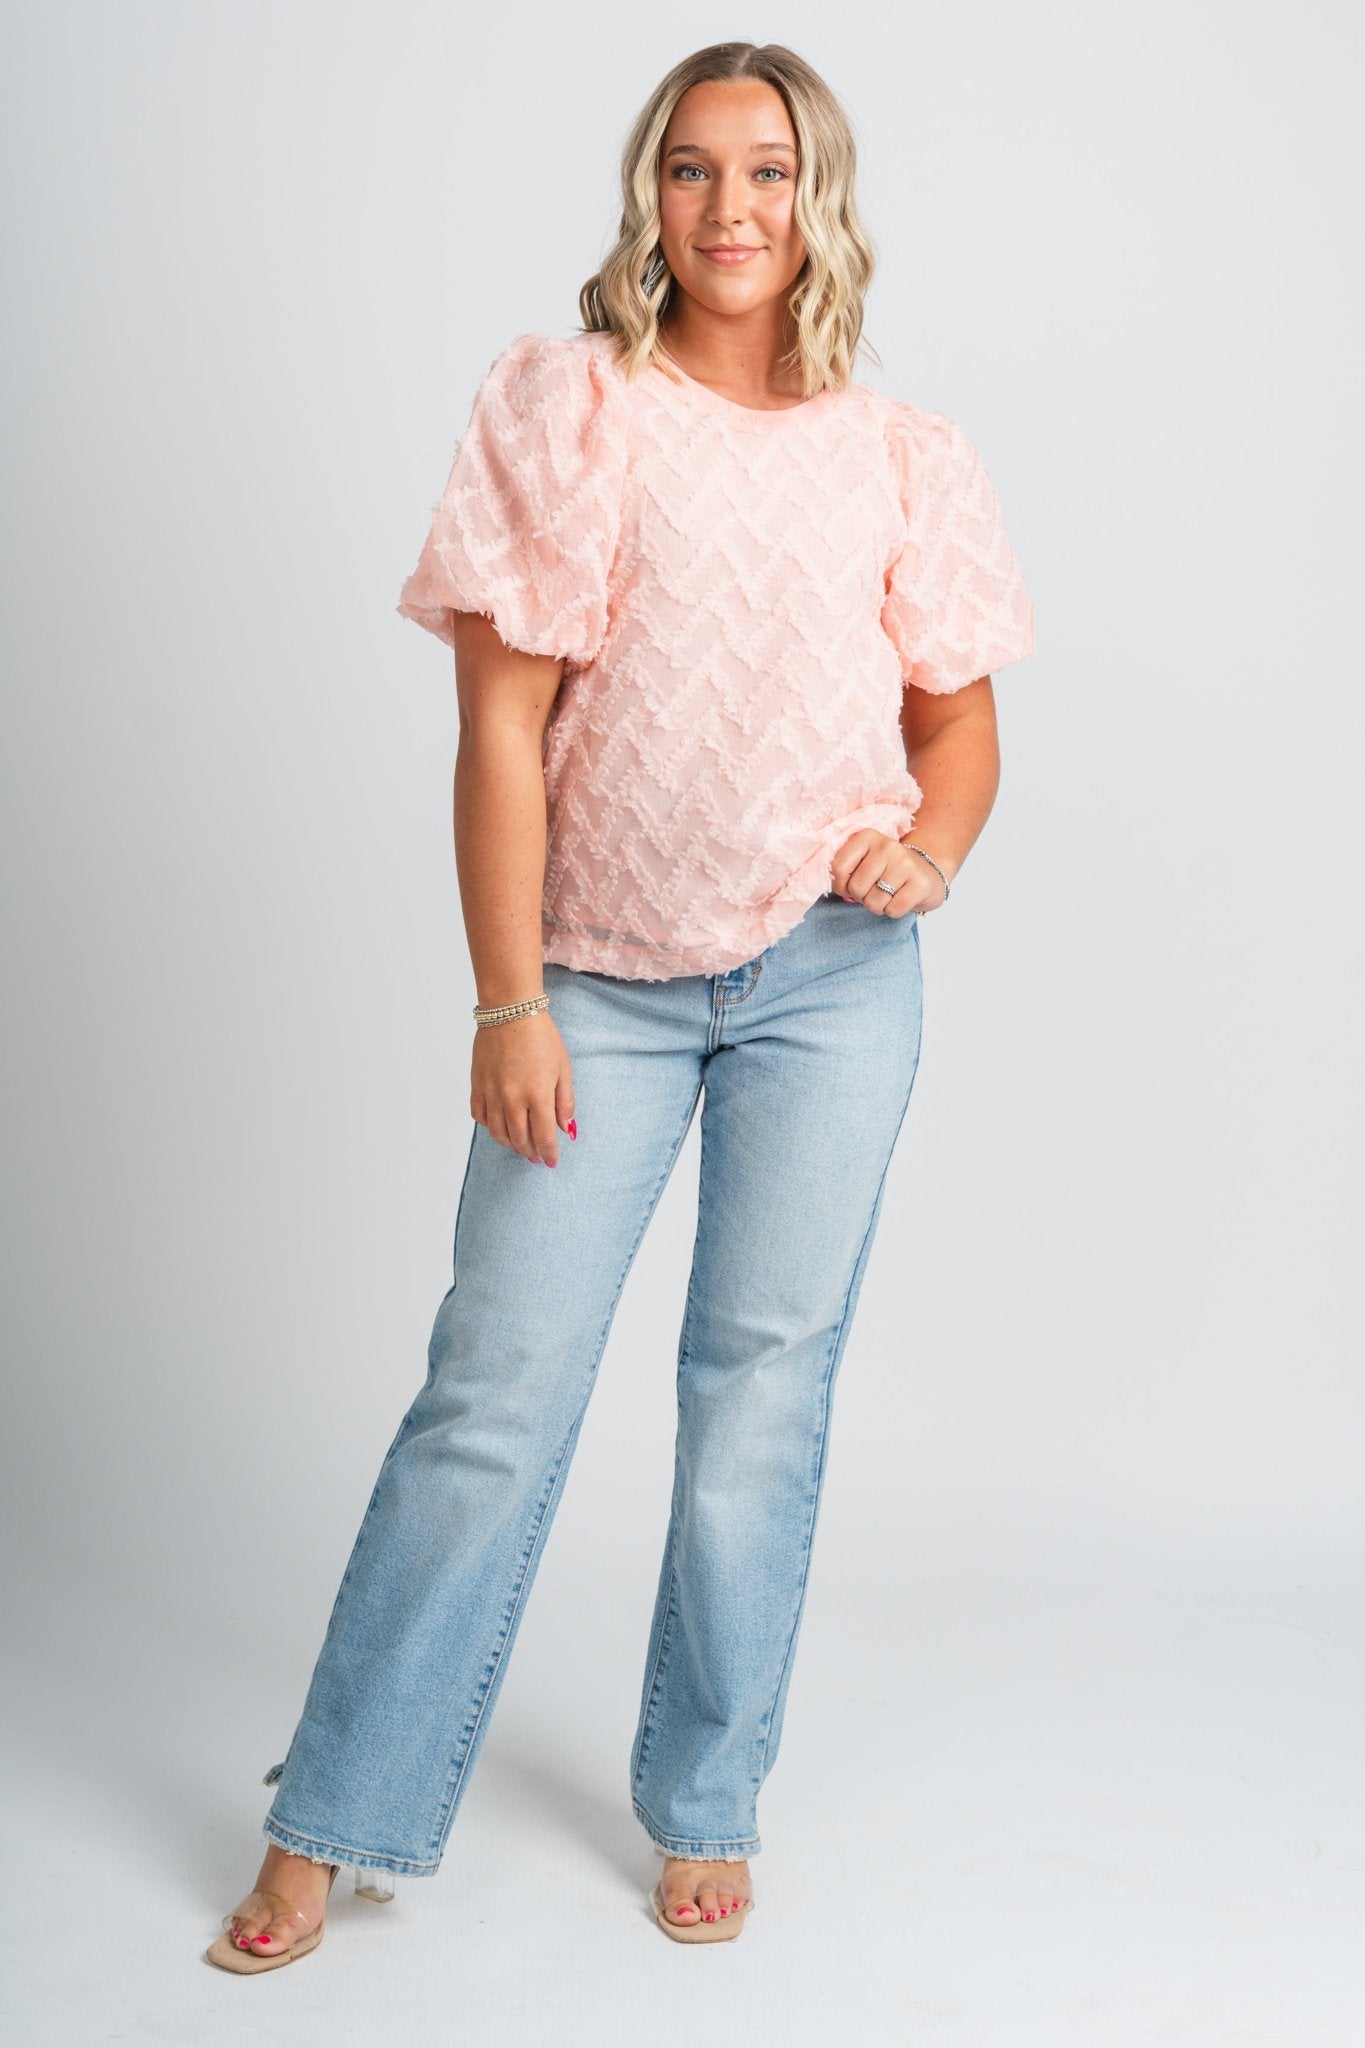 Tulle bubble sleeve top soft peach - Cute Top - Trendy Easter Clothing Line at Lush Fashion Lounge Boutique in Oklahoma